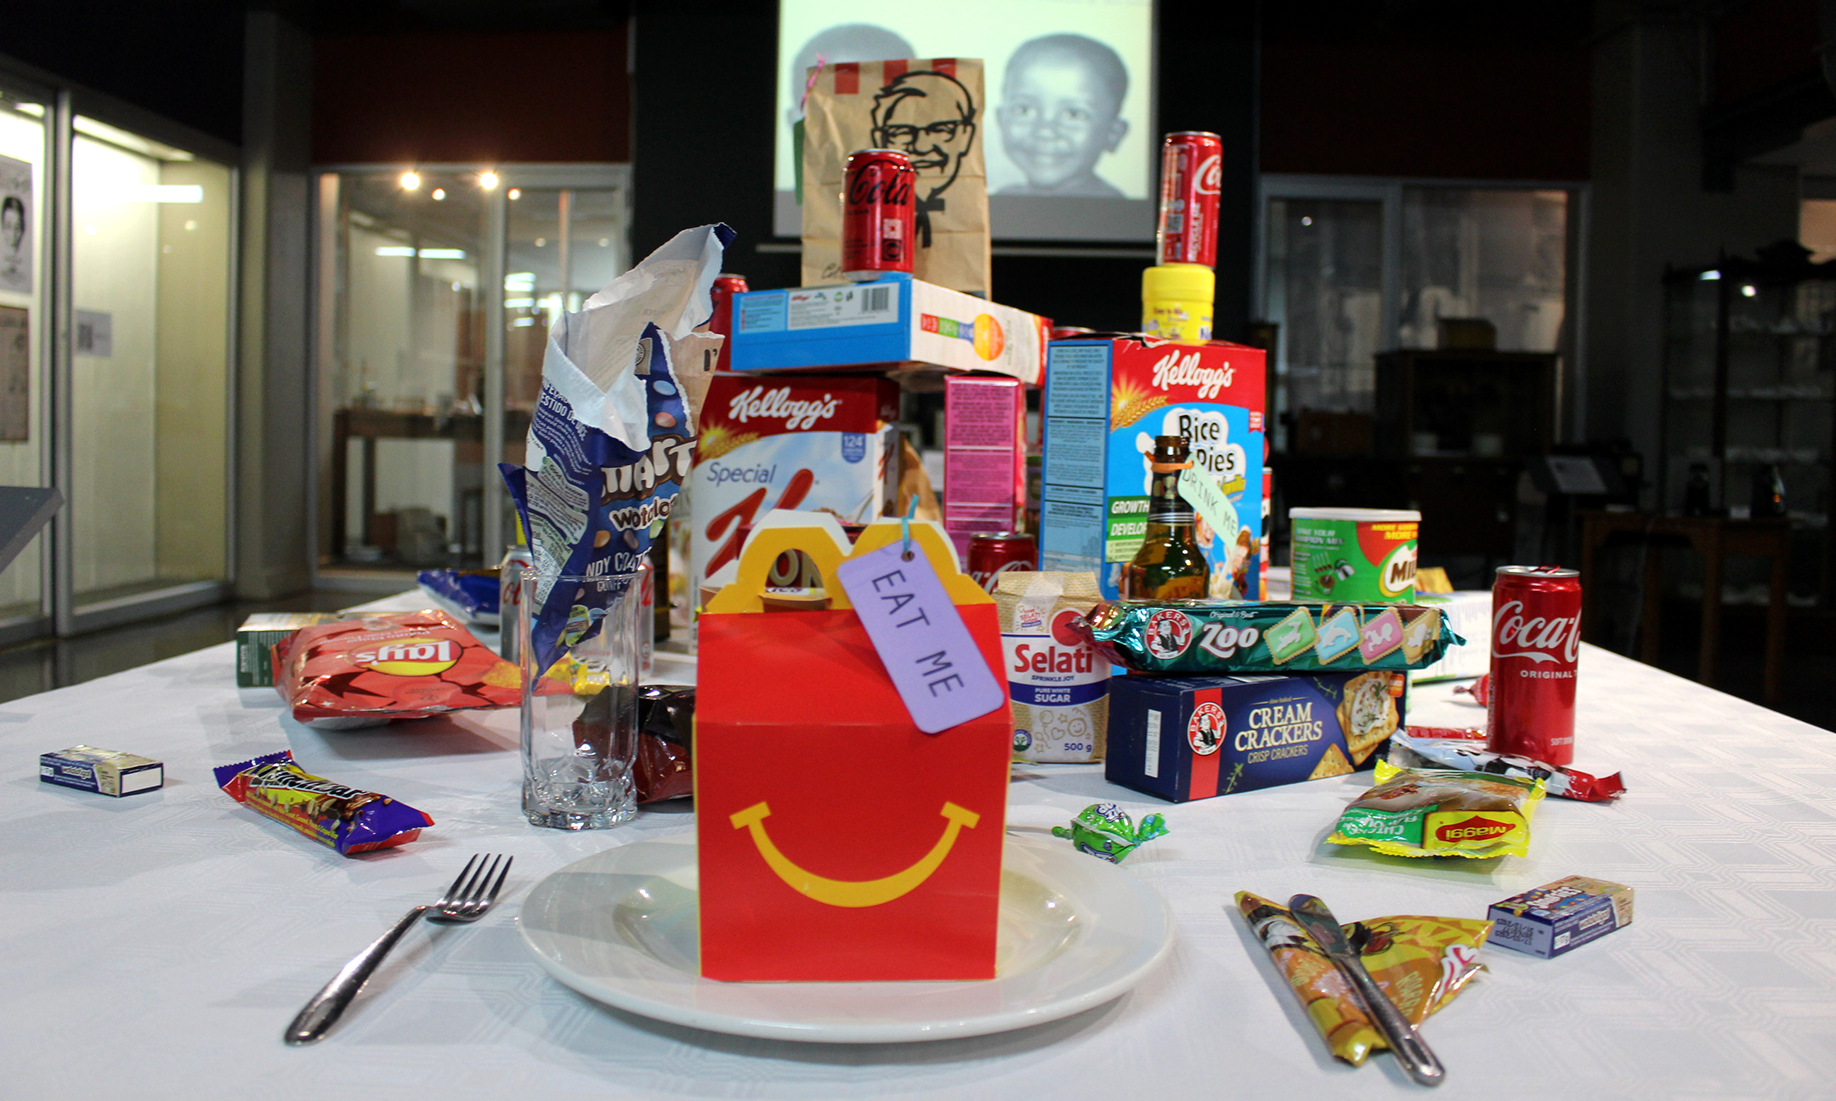 brands and products at the exhibition, ultra-processed food